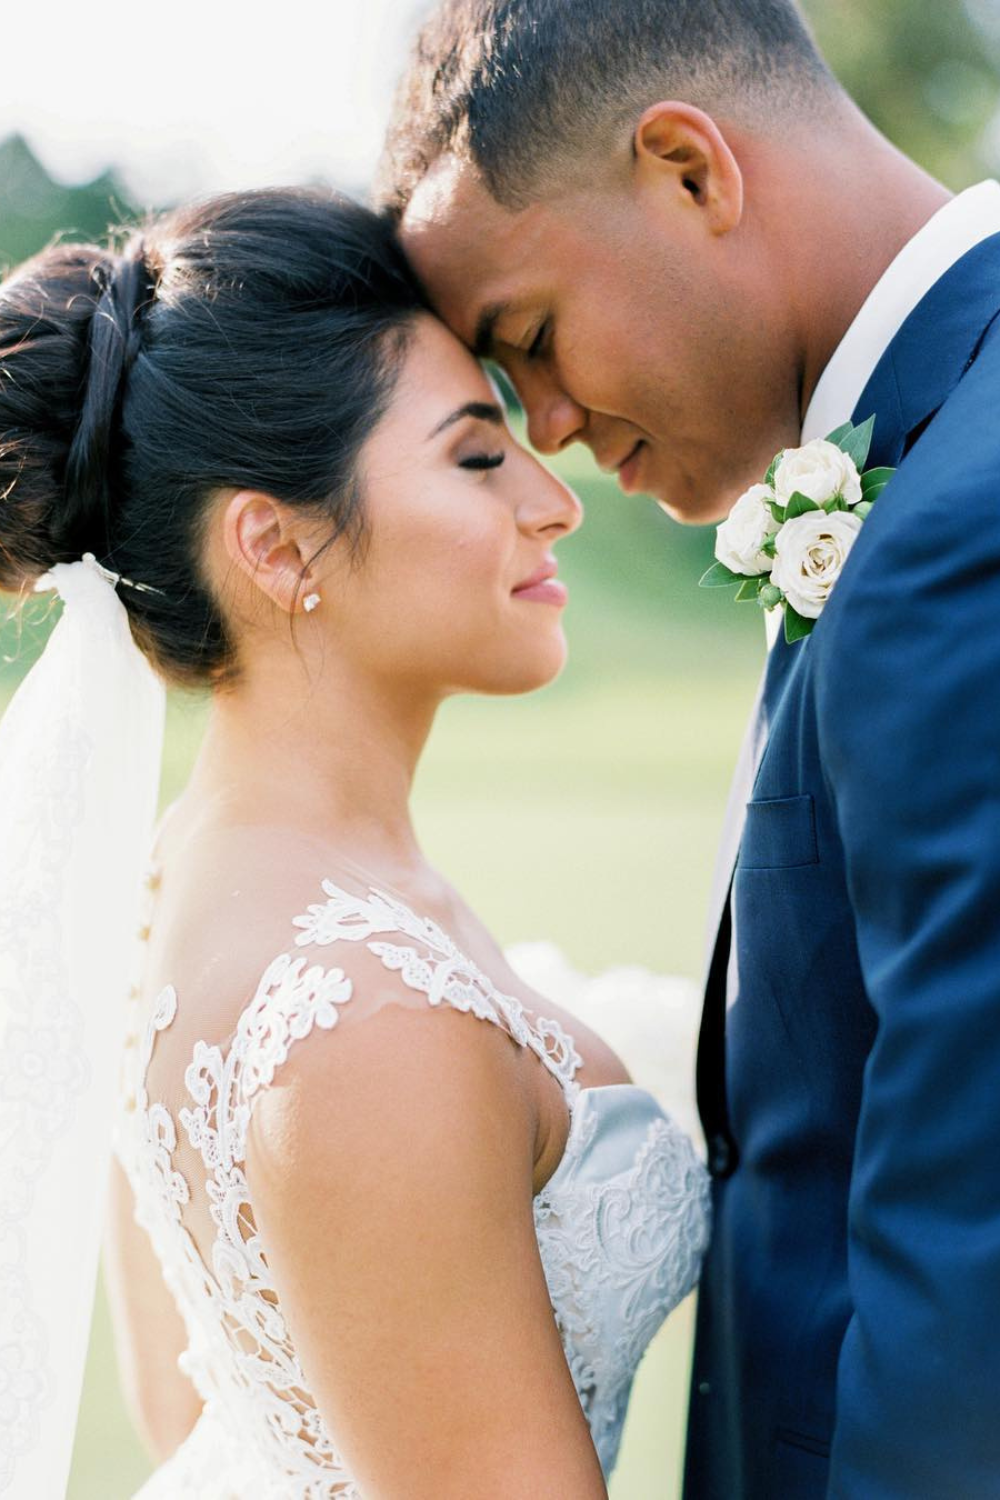 Jordan Hicks, LB For The Vikings, And His Wife, During Their Wedding